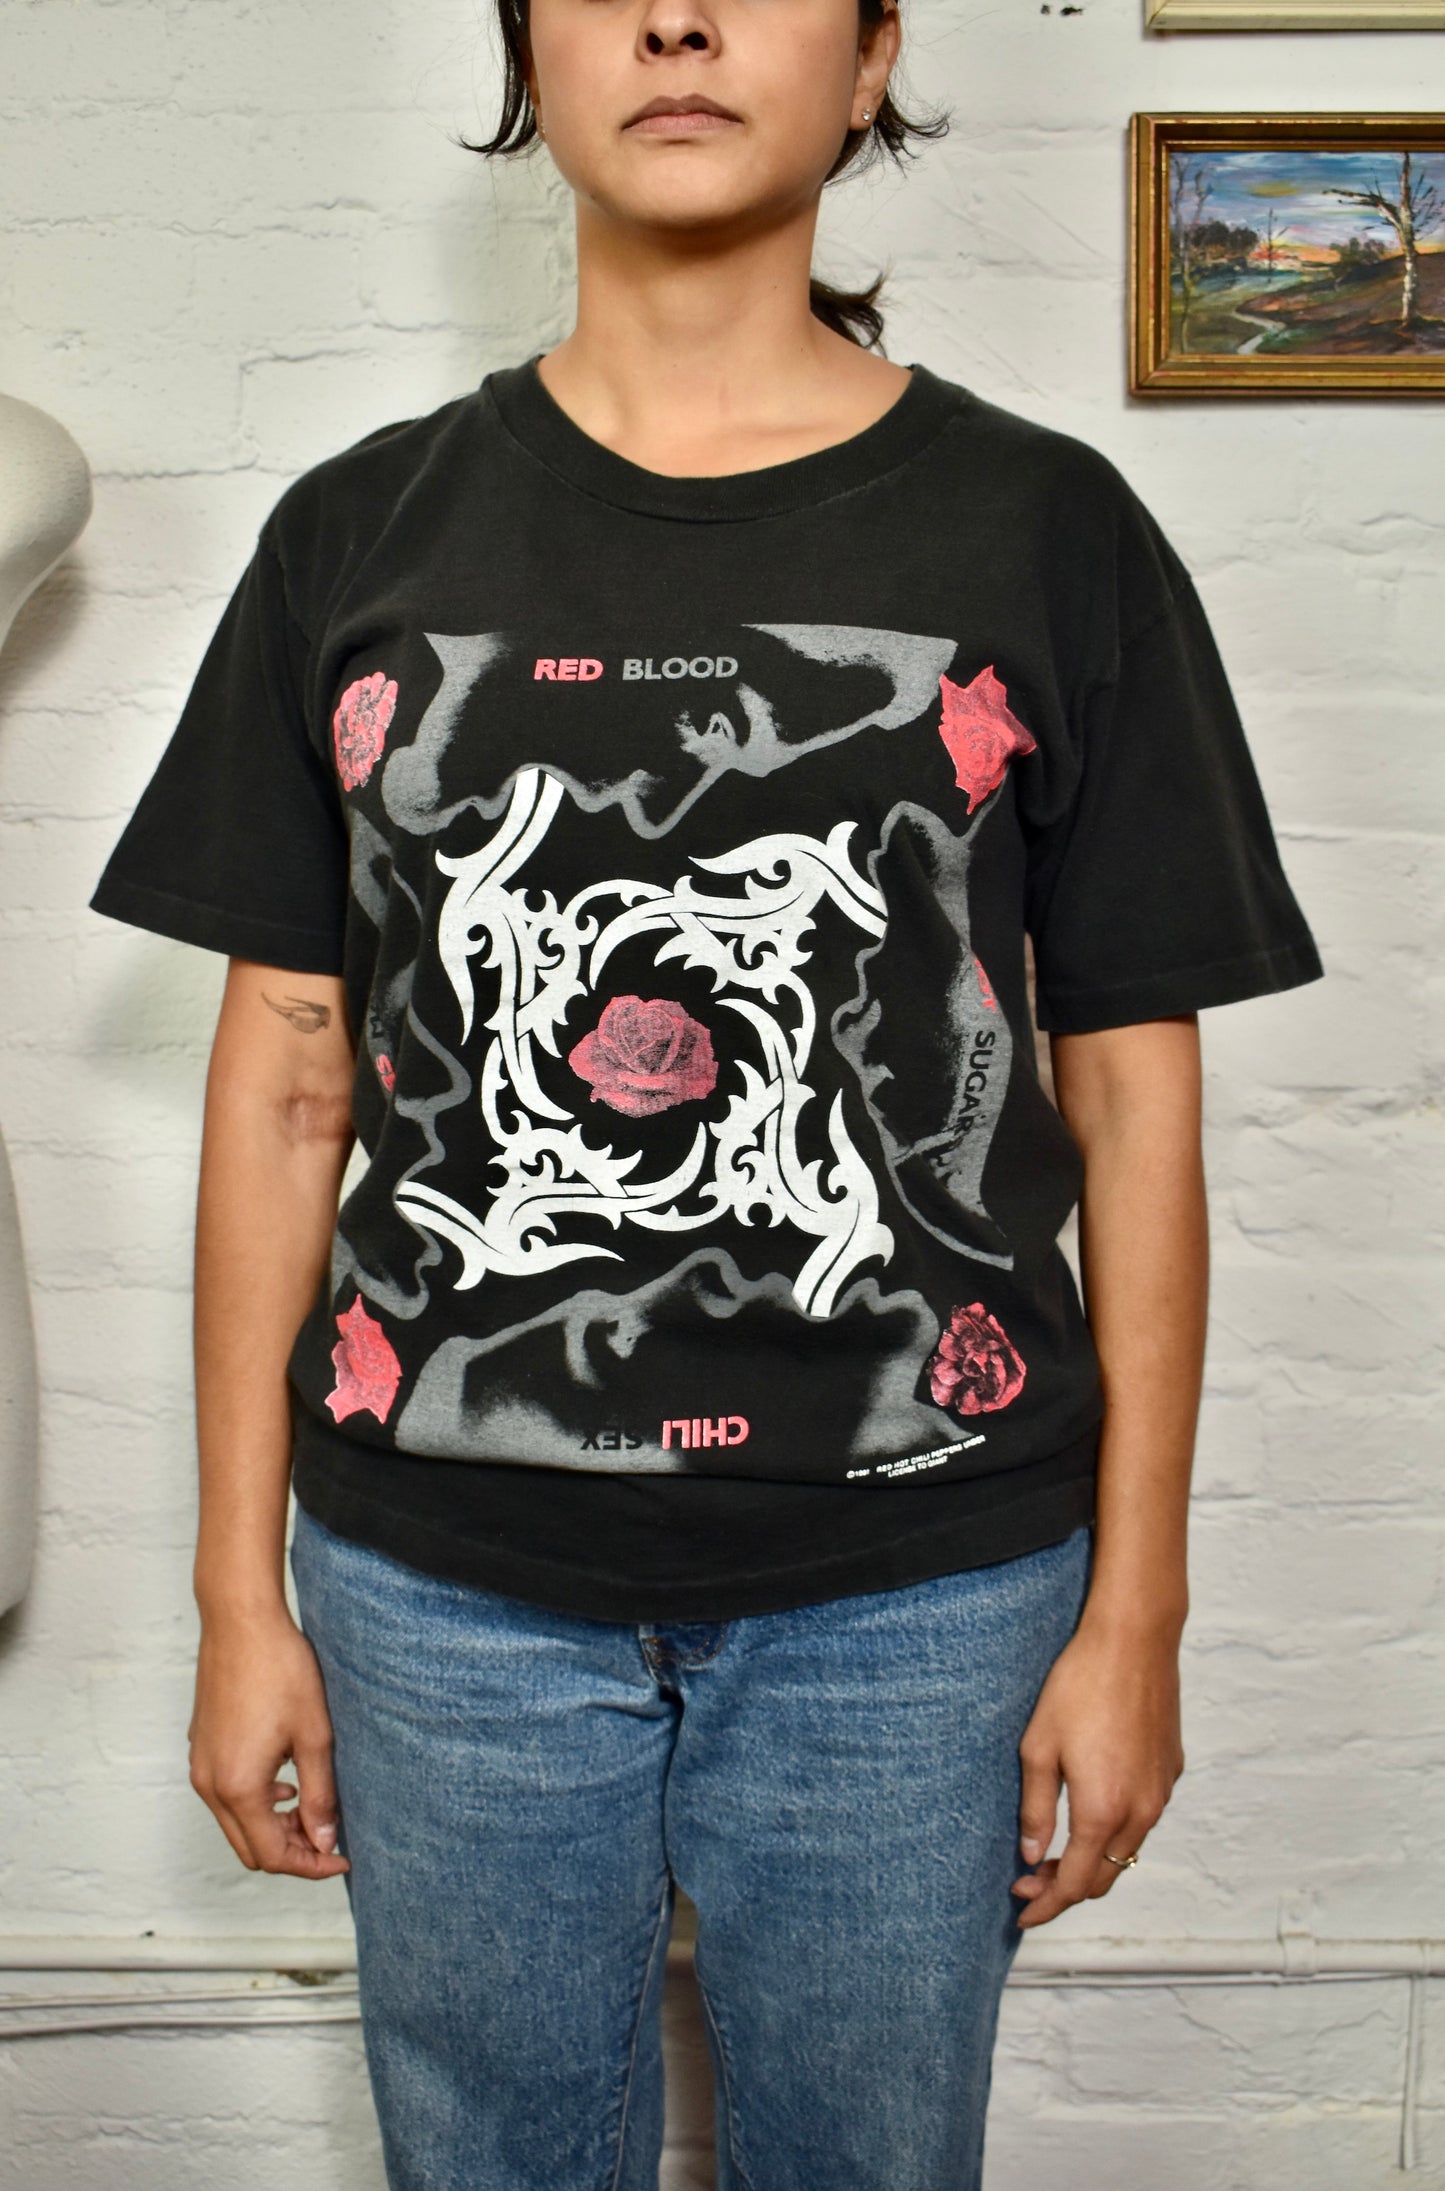 Vintage 90s "Red Hot Chilli Peppers" T-shirt